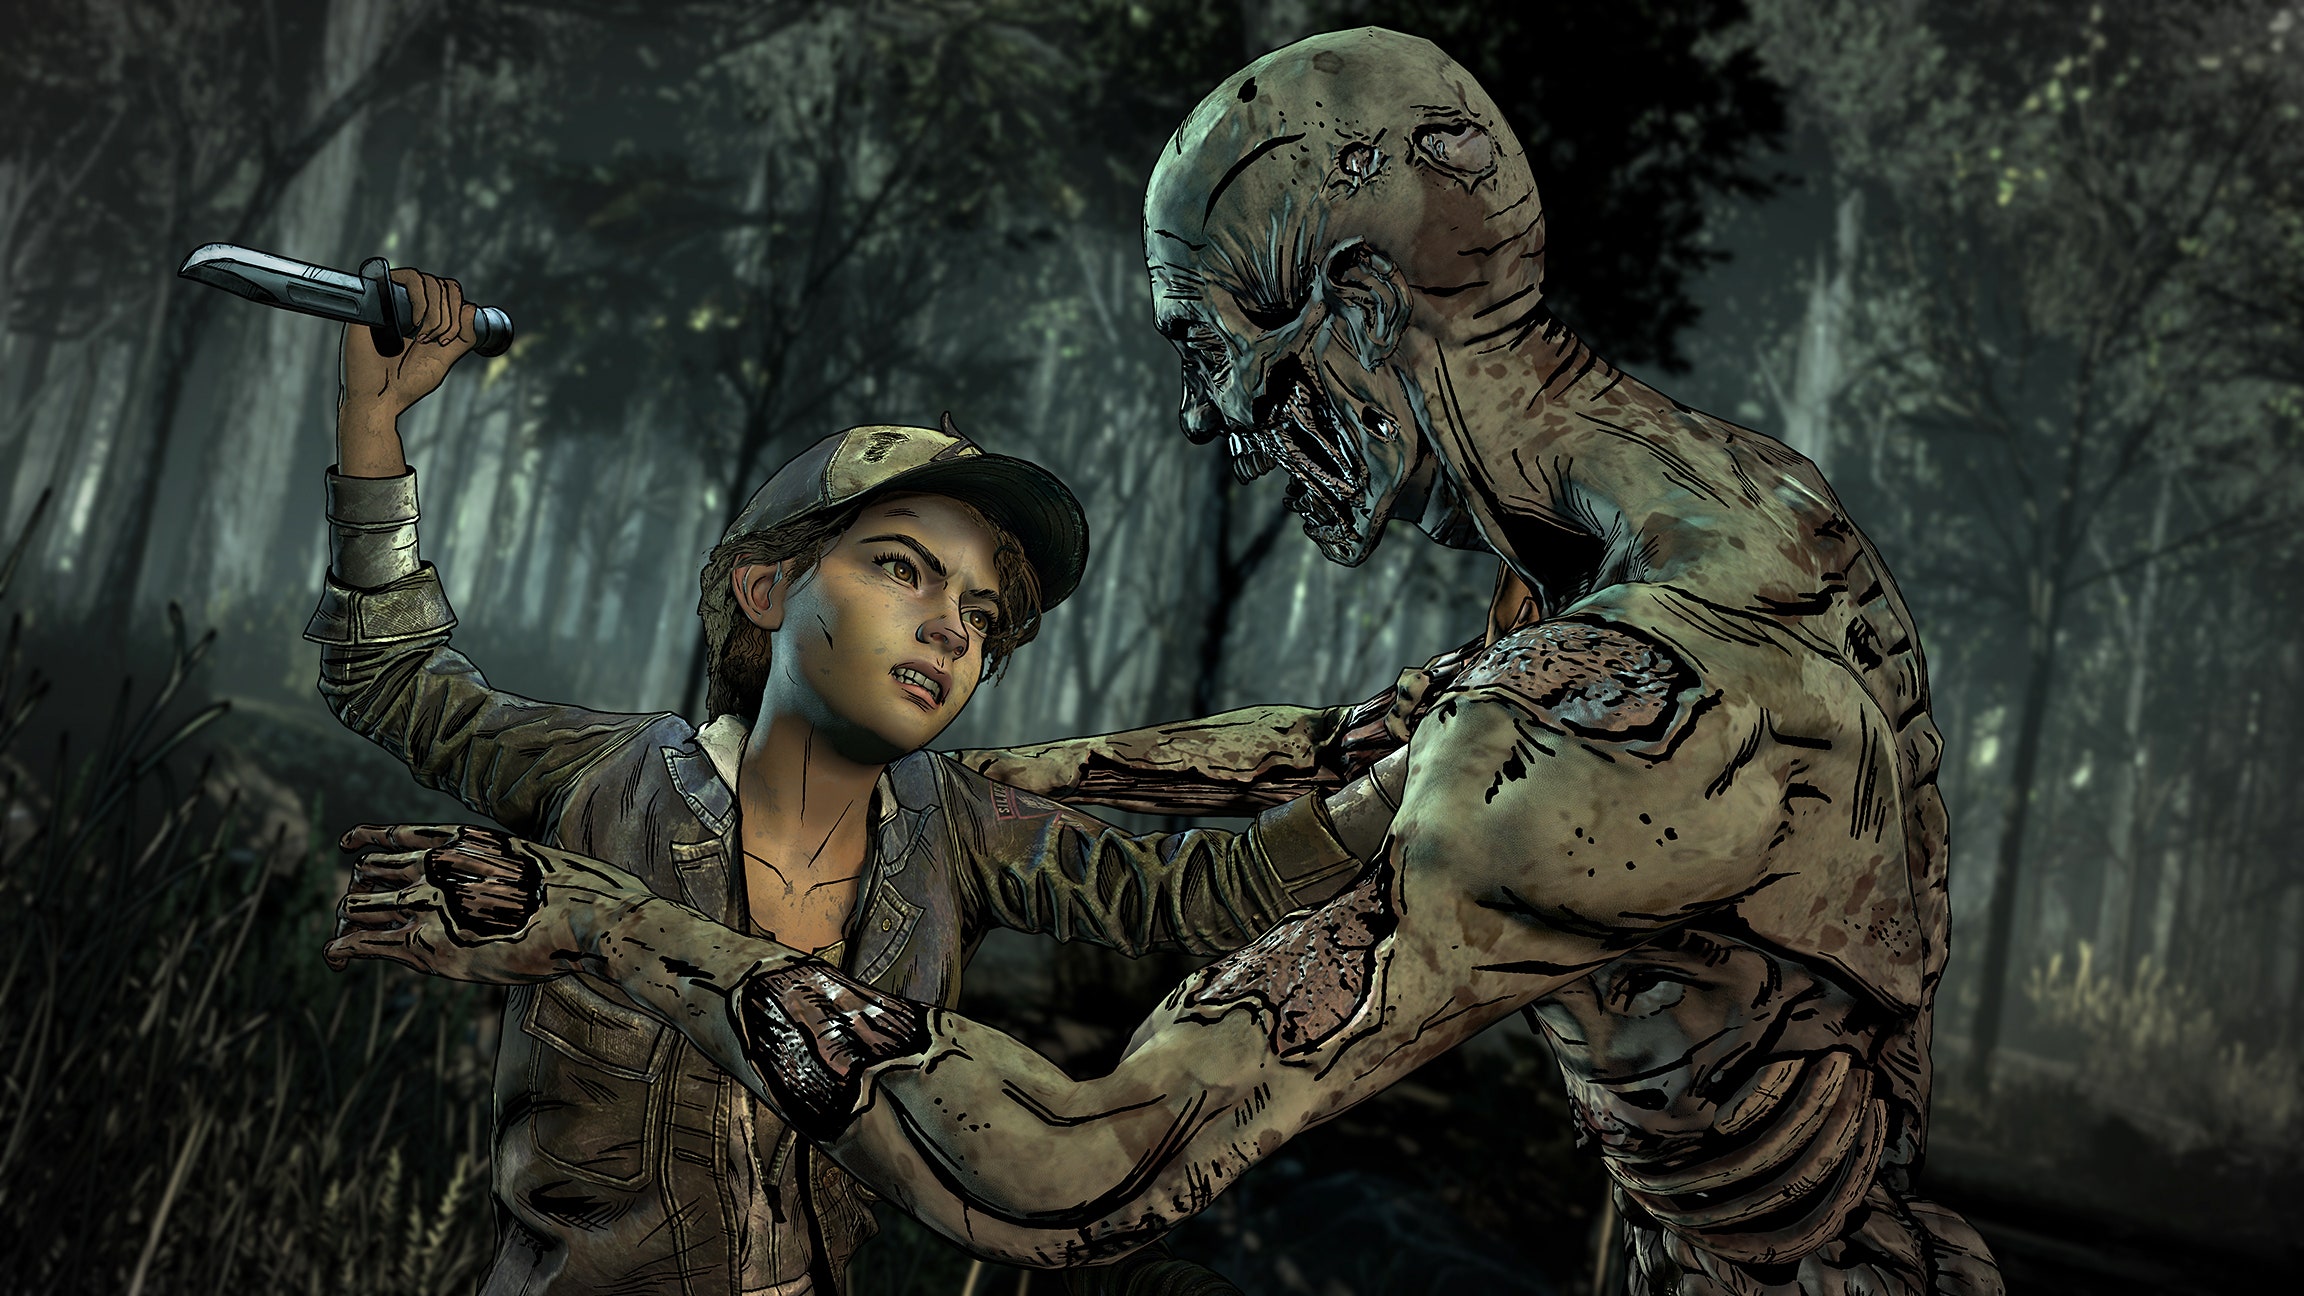 Child video game protagonists - The Walking Dead (Clementine)